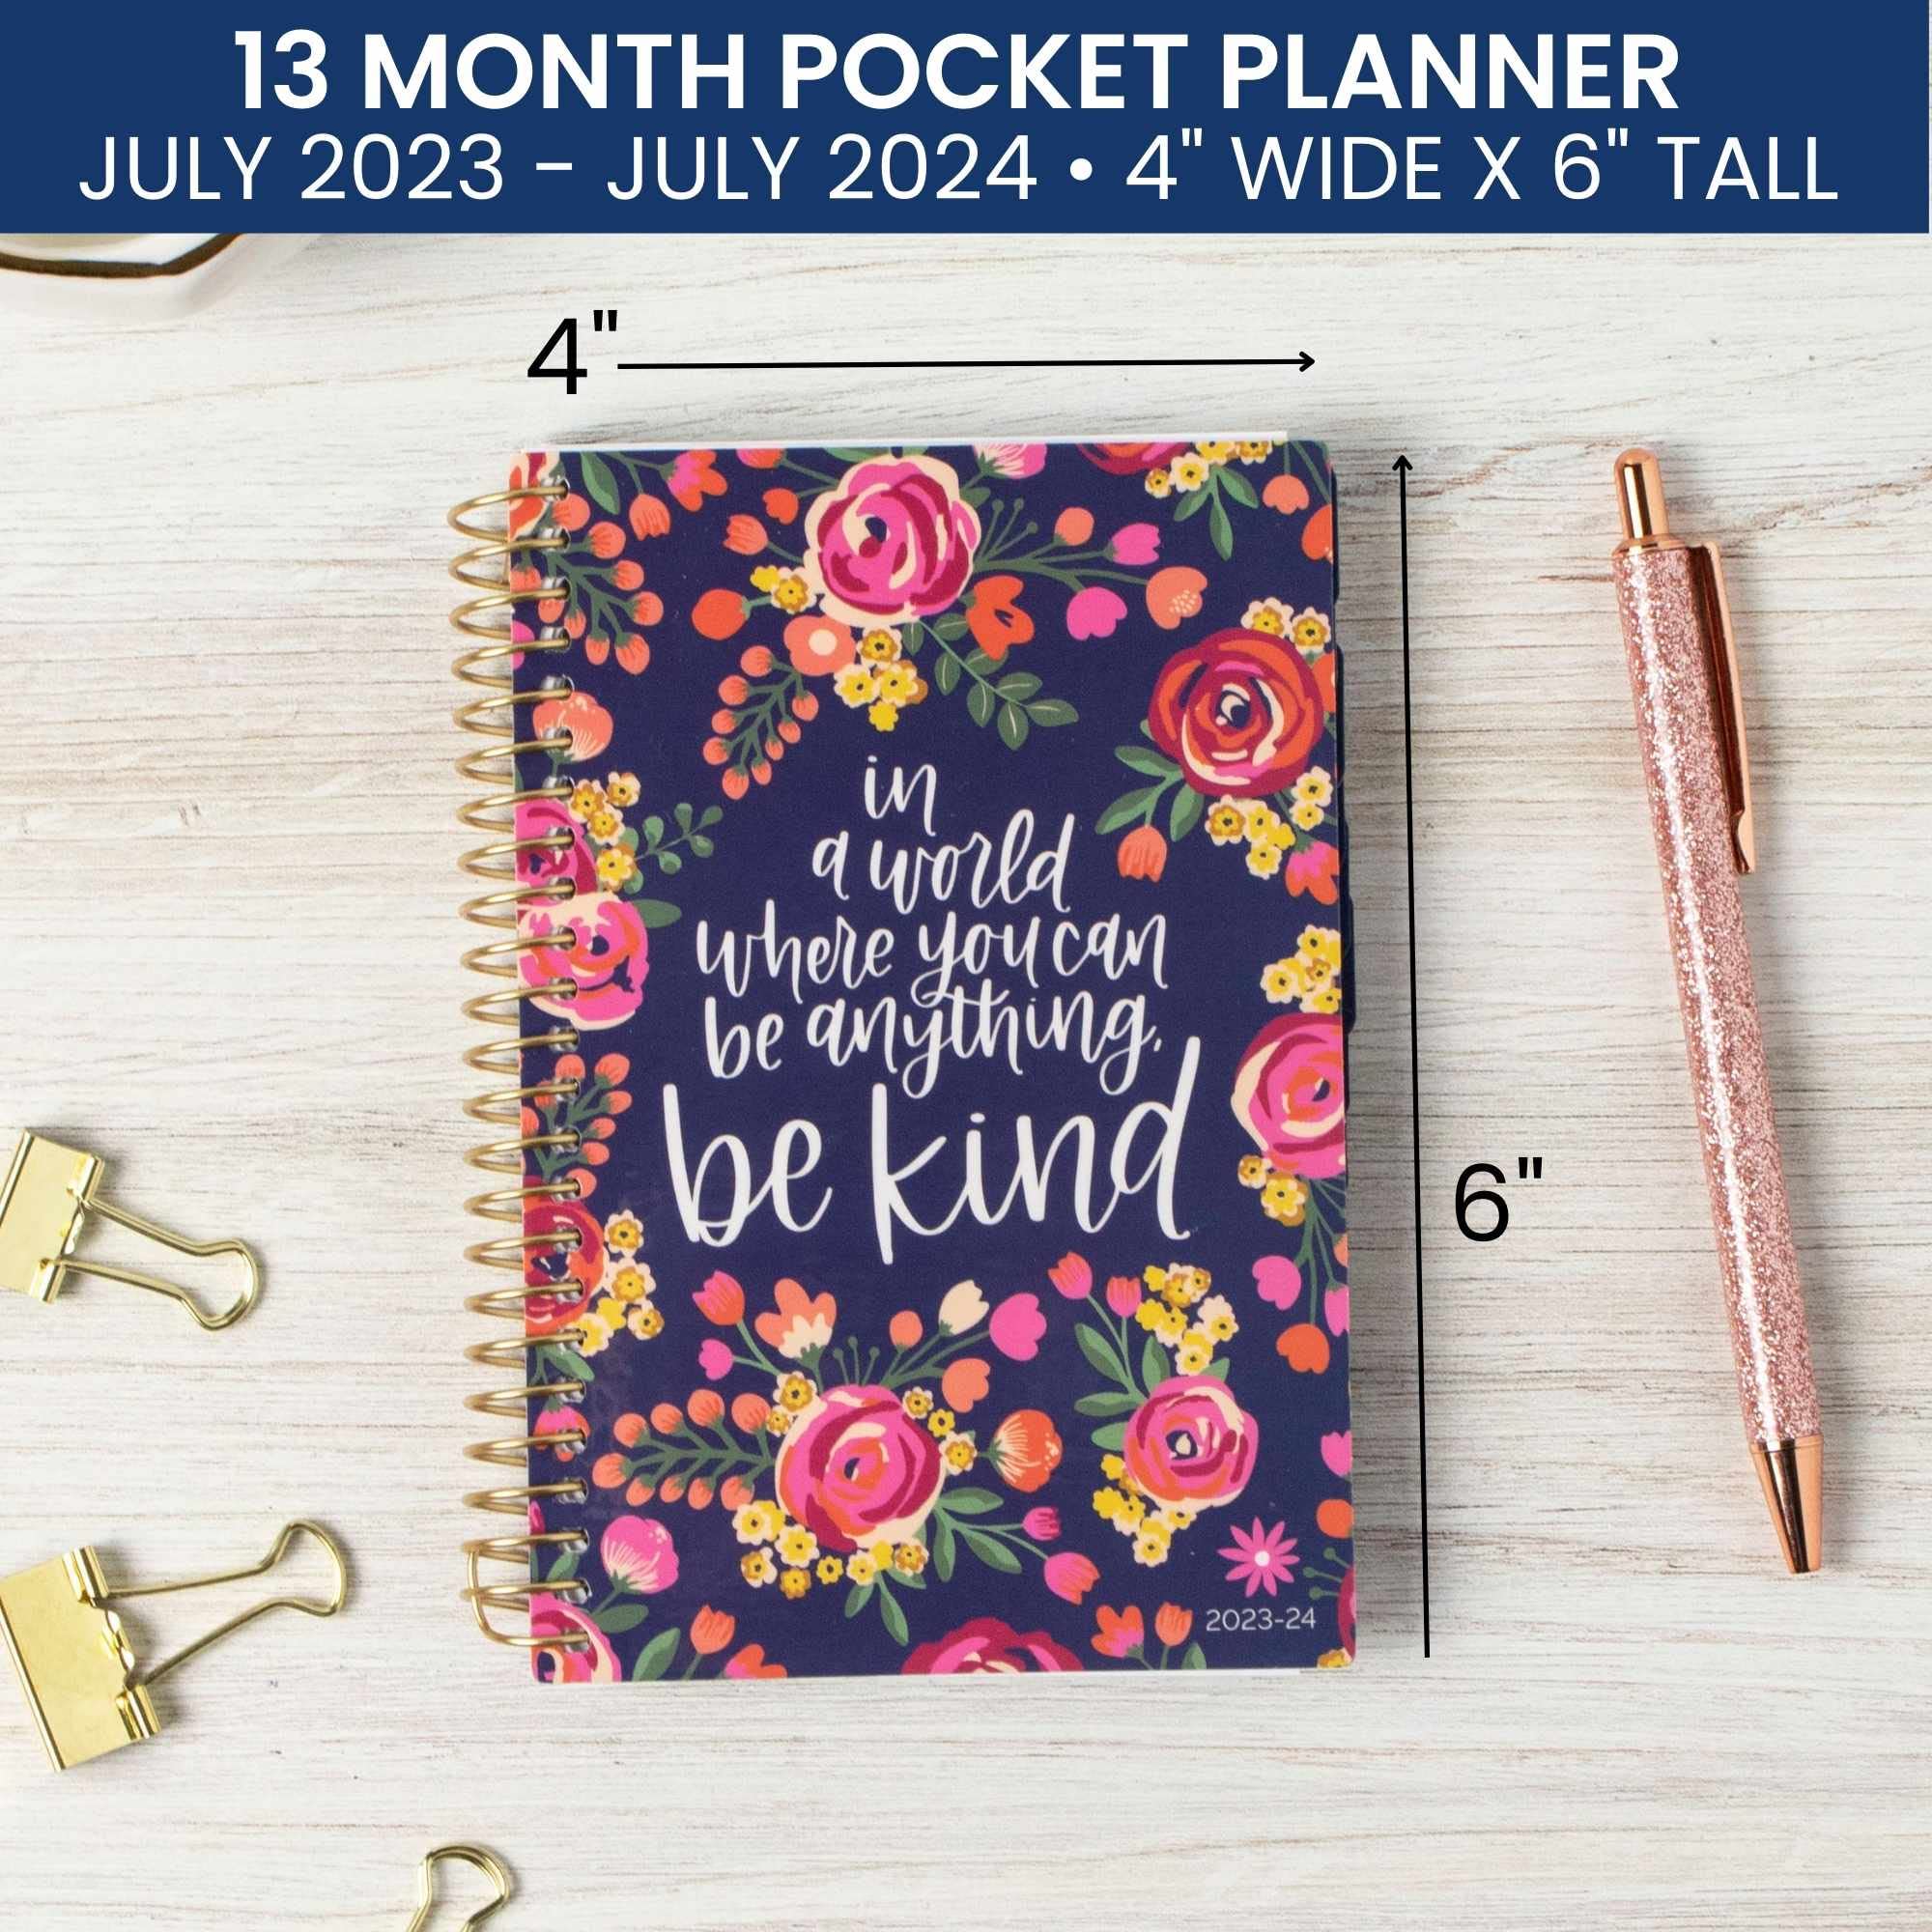 bloom daily planners 2023-2024 Academic Year Day Planner (July 2023 - July 2024) - 5.5” x 8.25” - Weekly/Monthly Agenda Organizer Book with Stickers & Bookmark - Be Kind